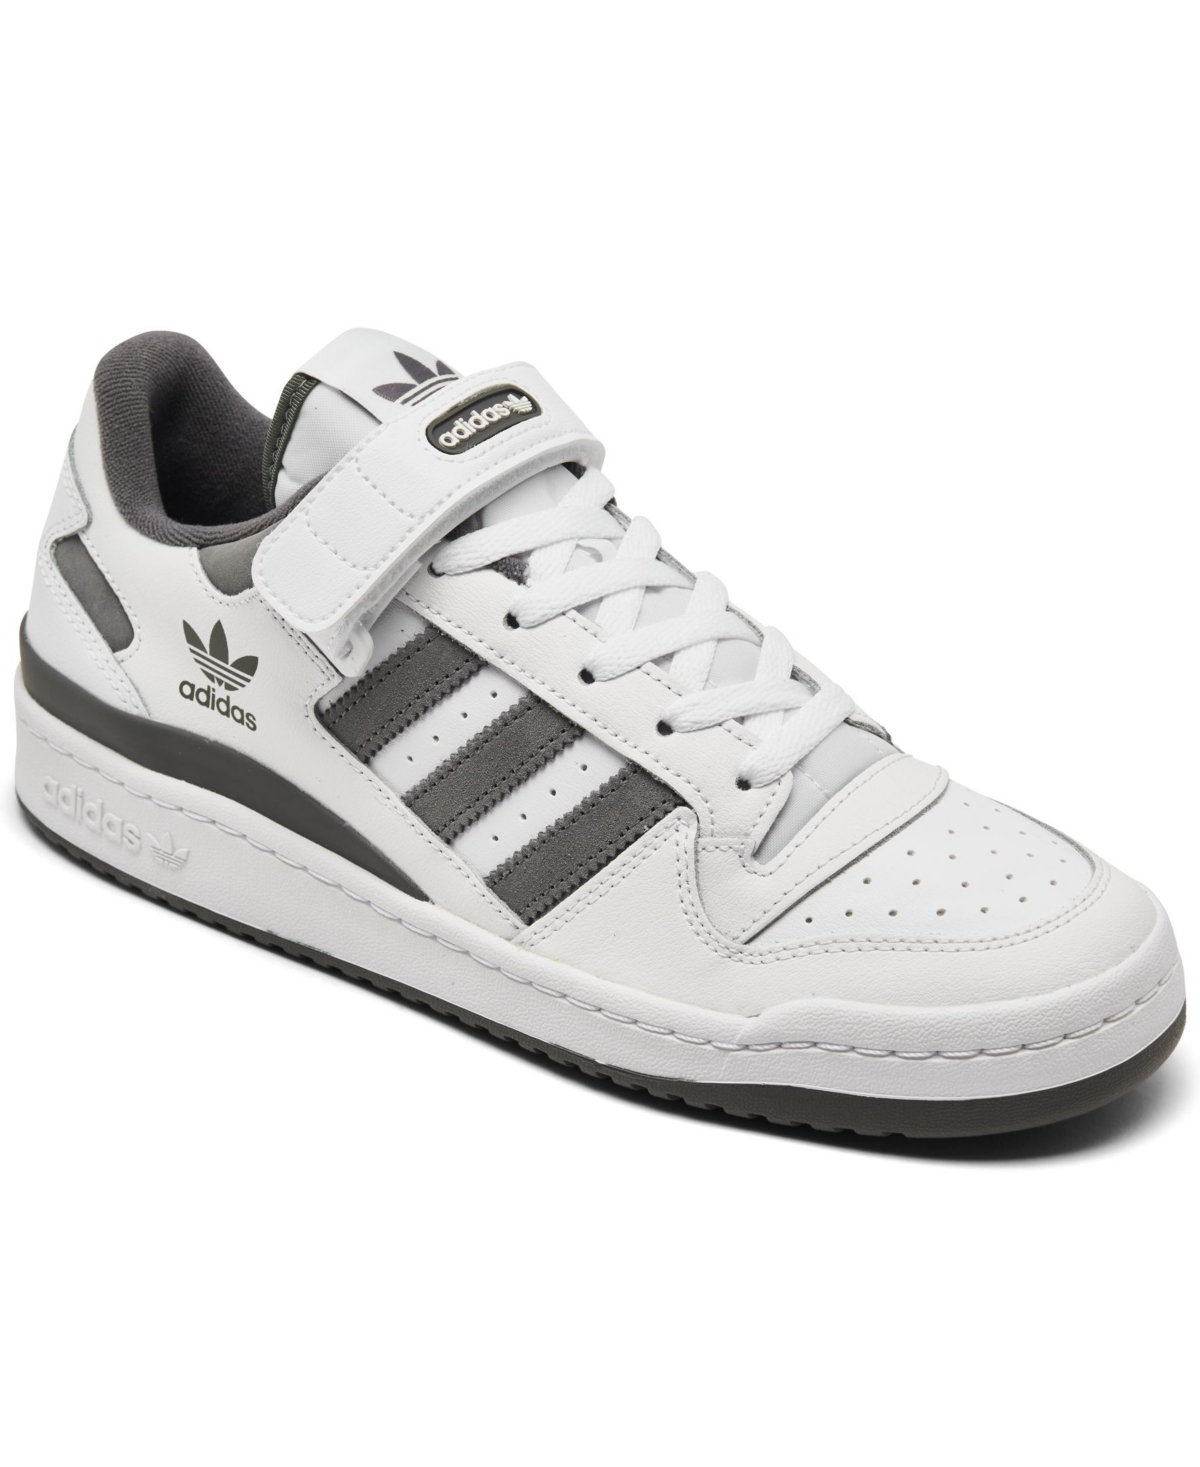 adidas Originals Men's Forum Low Casual Sneakers from Finish Line